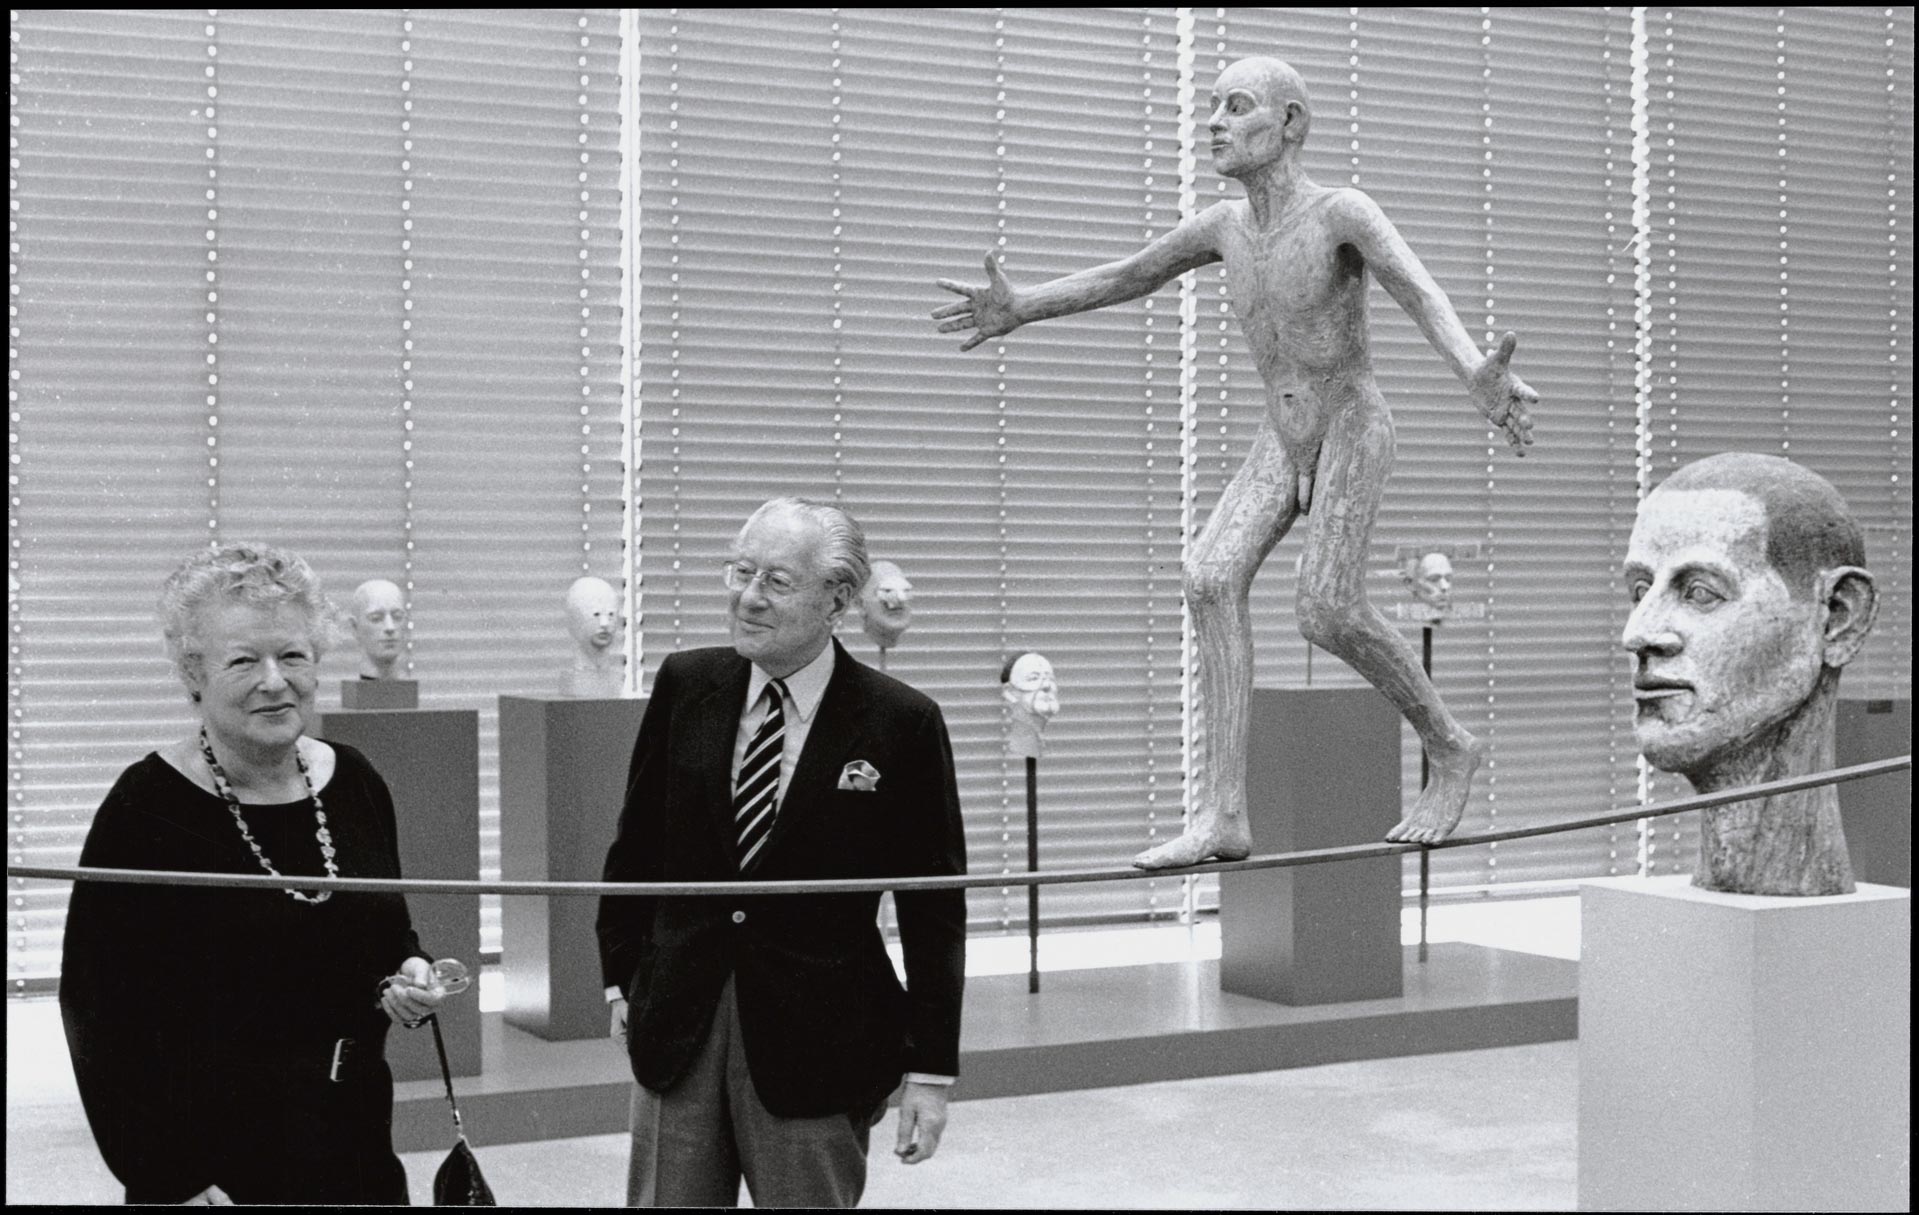 Sir Robert and Lady Sainsbury in the gallery, 1985